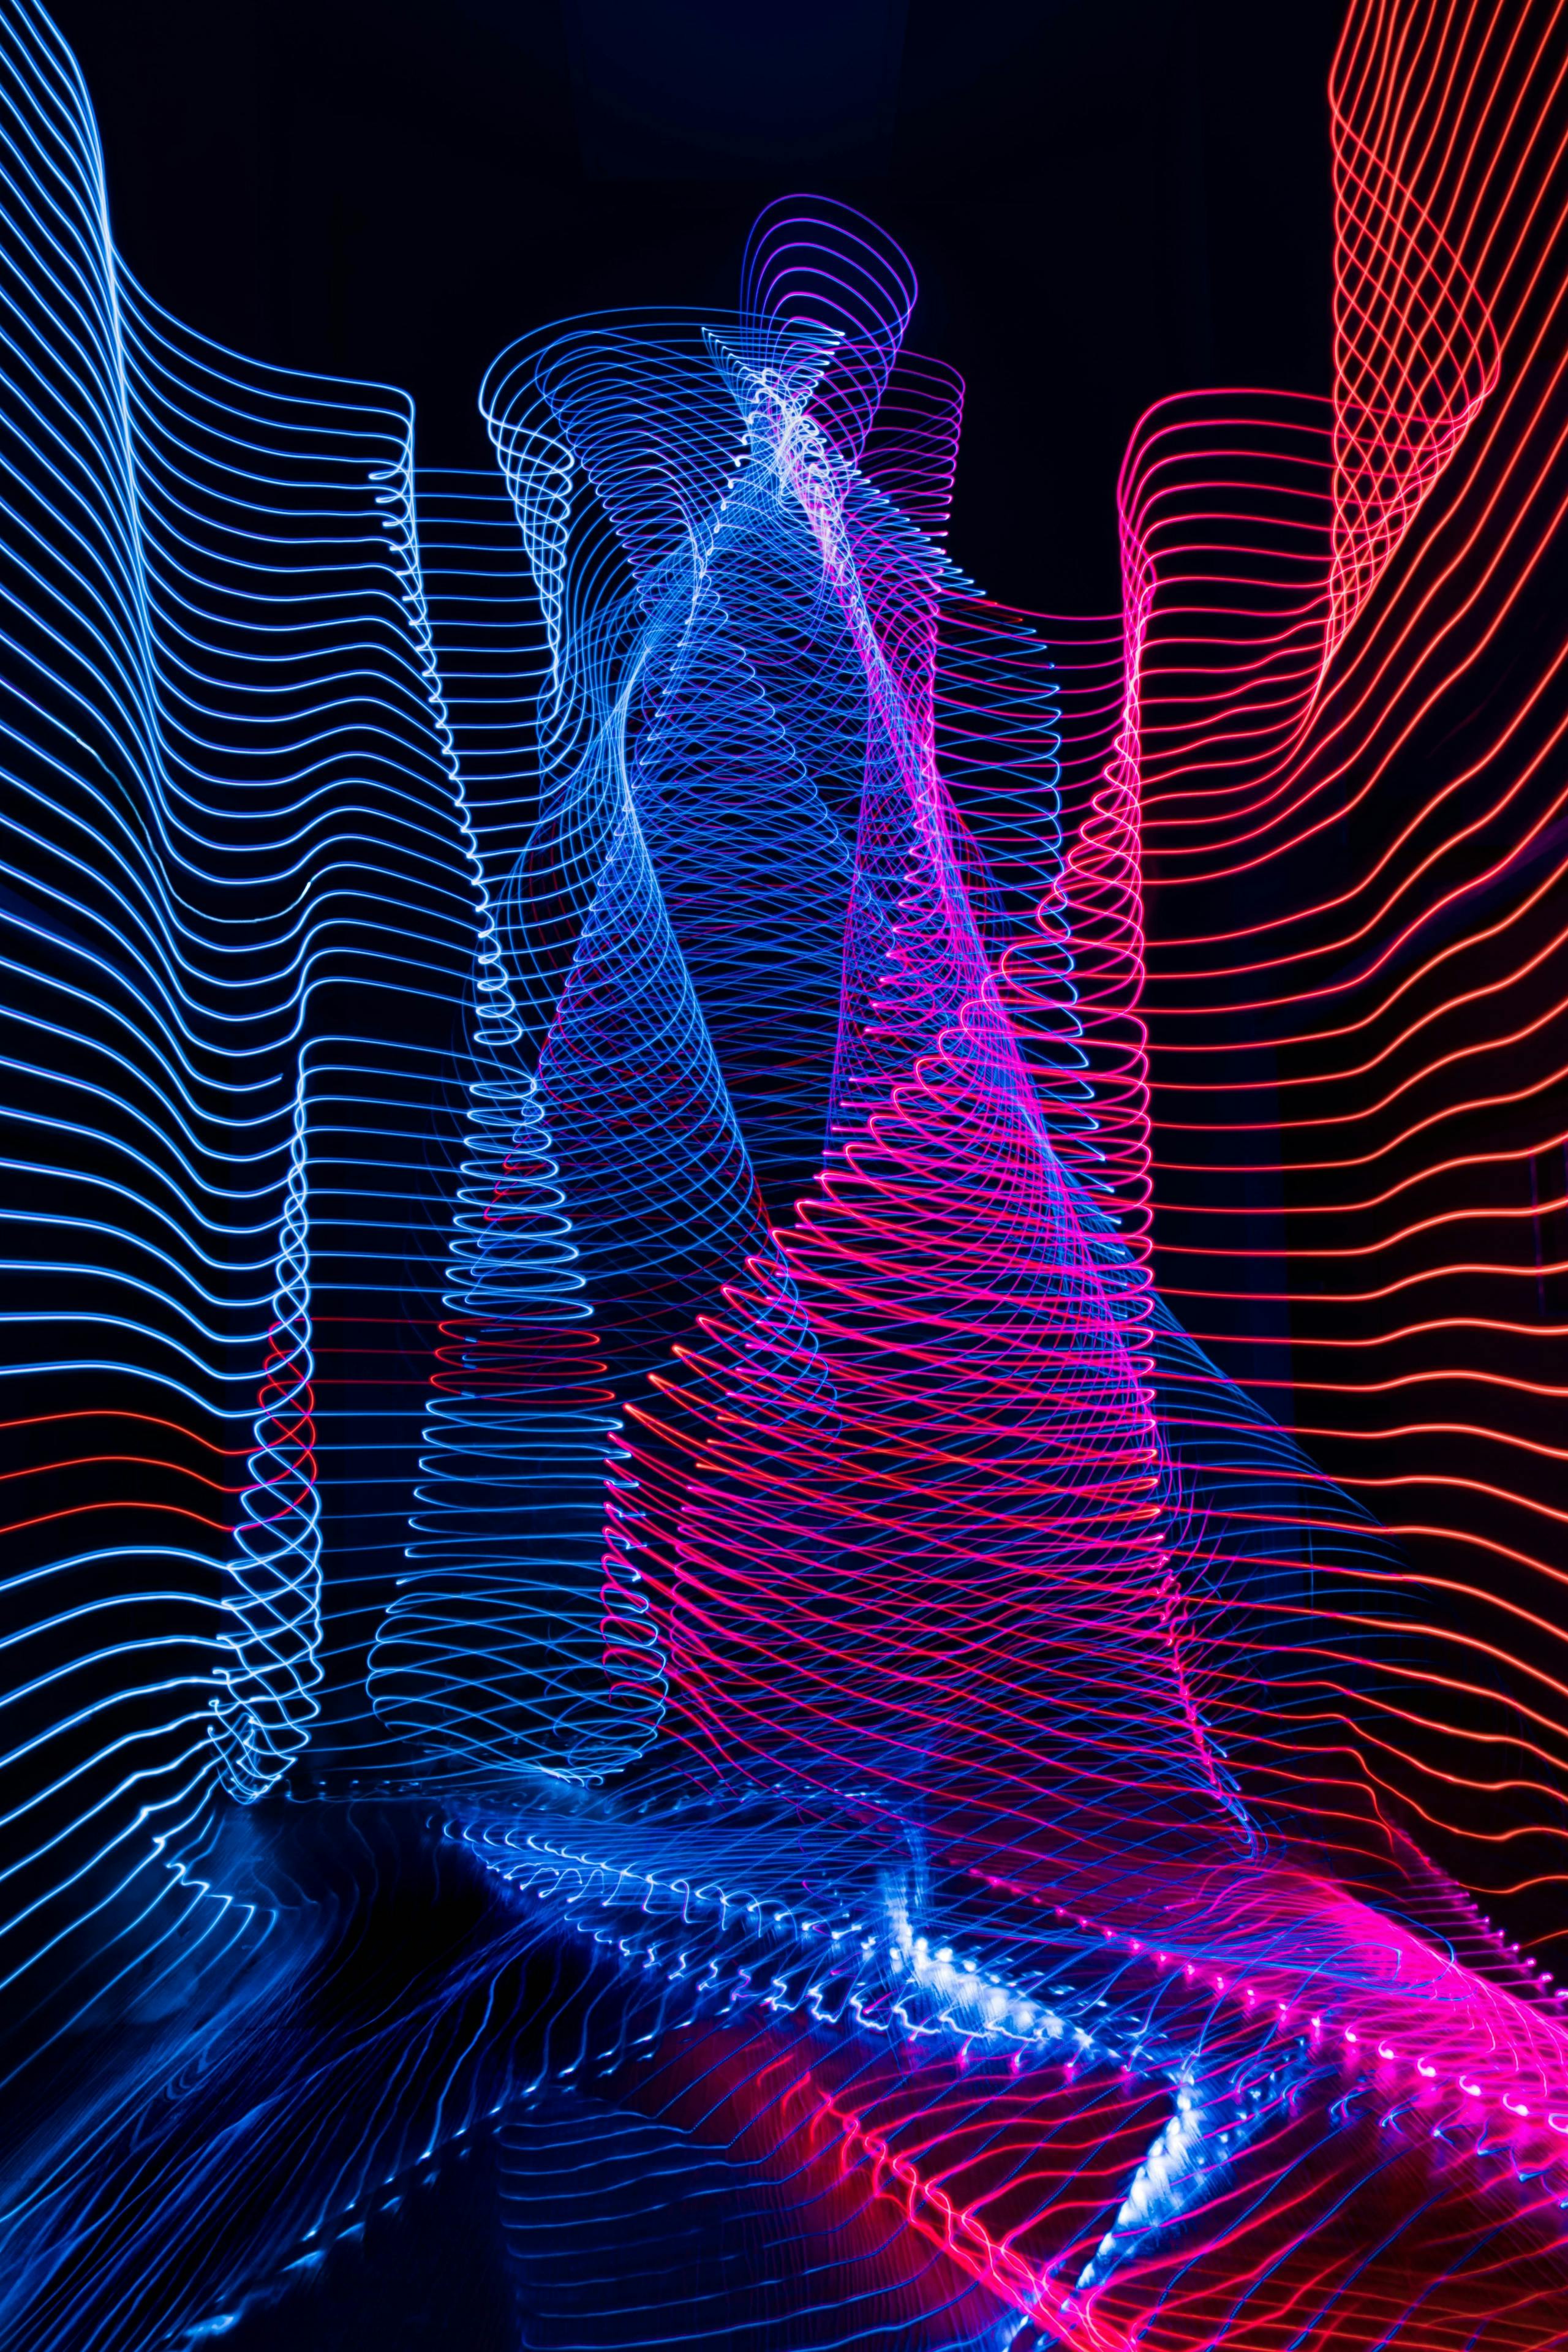 Wavy lines of light in blue, purple, and red